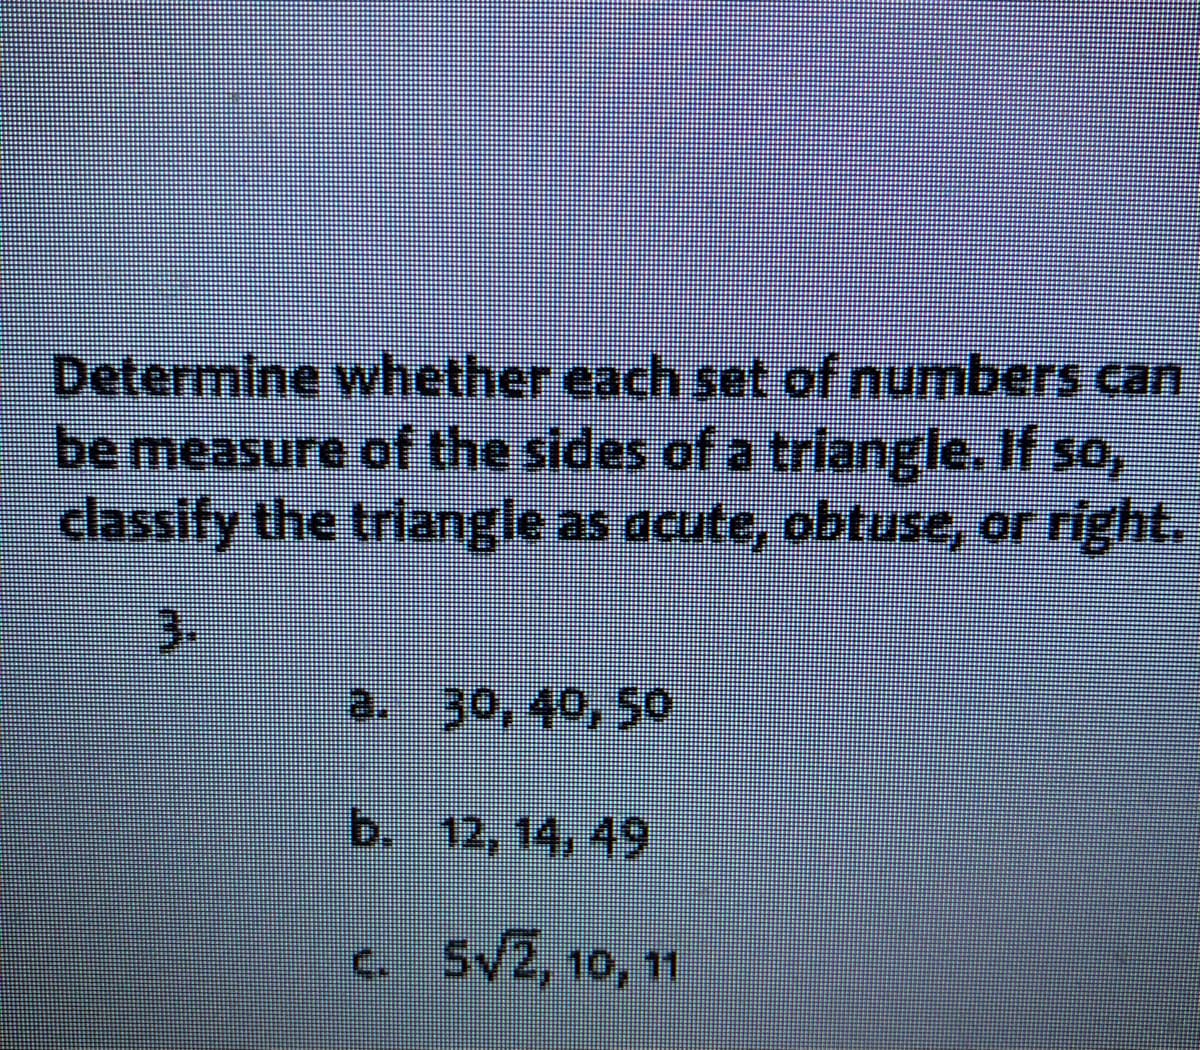 Determine whether each set of numbers can
be measure of the sides of a triangle. If so,
classify the triangle as acute, obtuse, or right.
3.
a. 30, 40, 50
b. 12, 14, 49
c. 5V2, 10, 11
